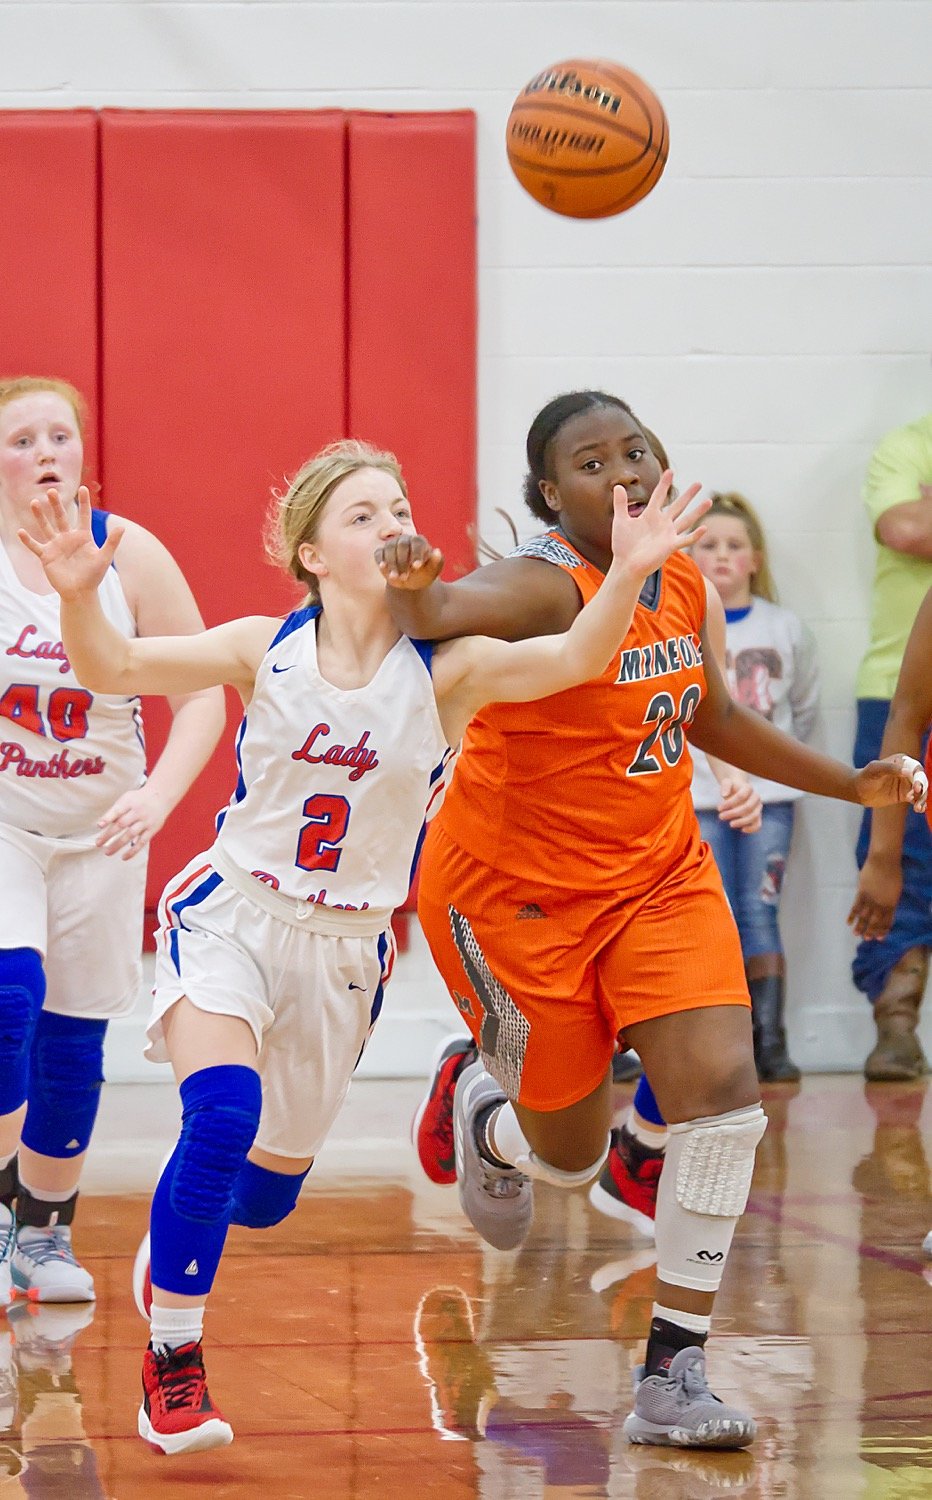 Freshman of the Year Cacie Lennon, 2, and first team all-district honoree Tiara Stephens, 20, battle for a loose ball.